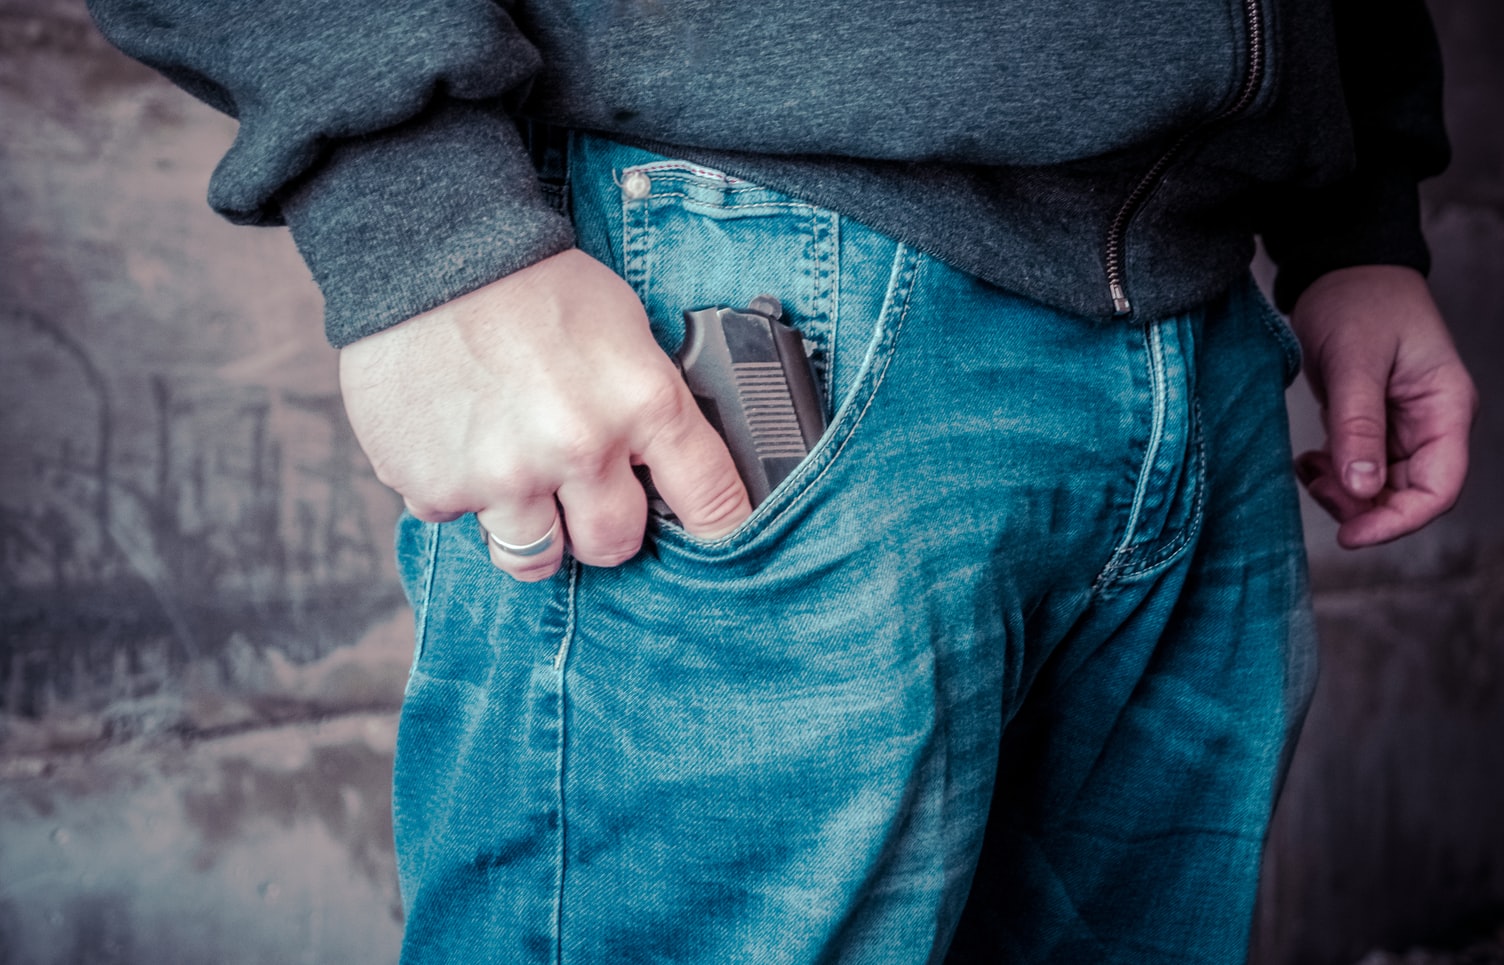 10 do’s and don’ts of concealed carry